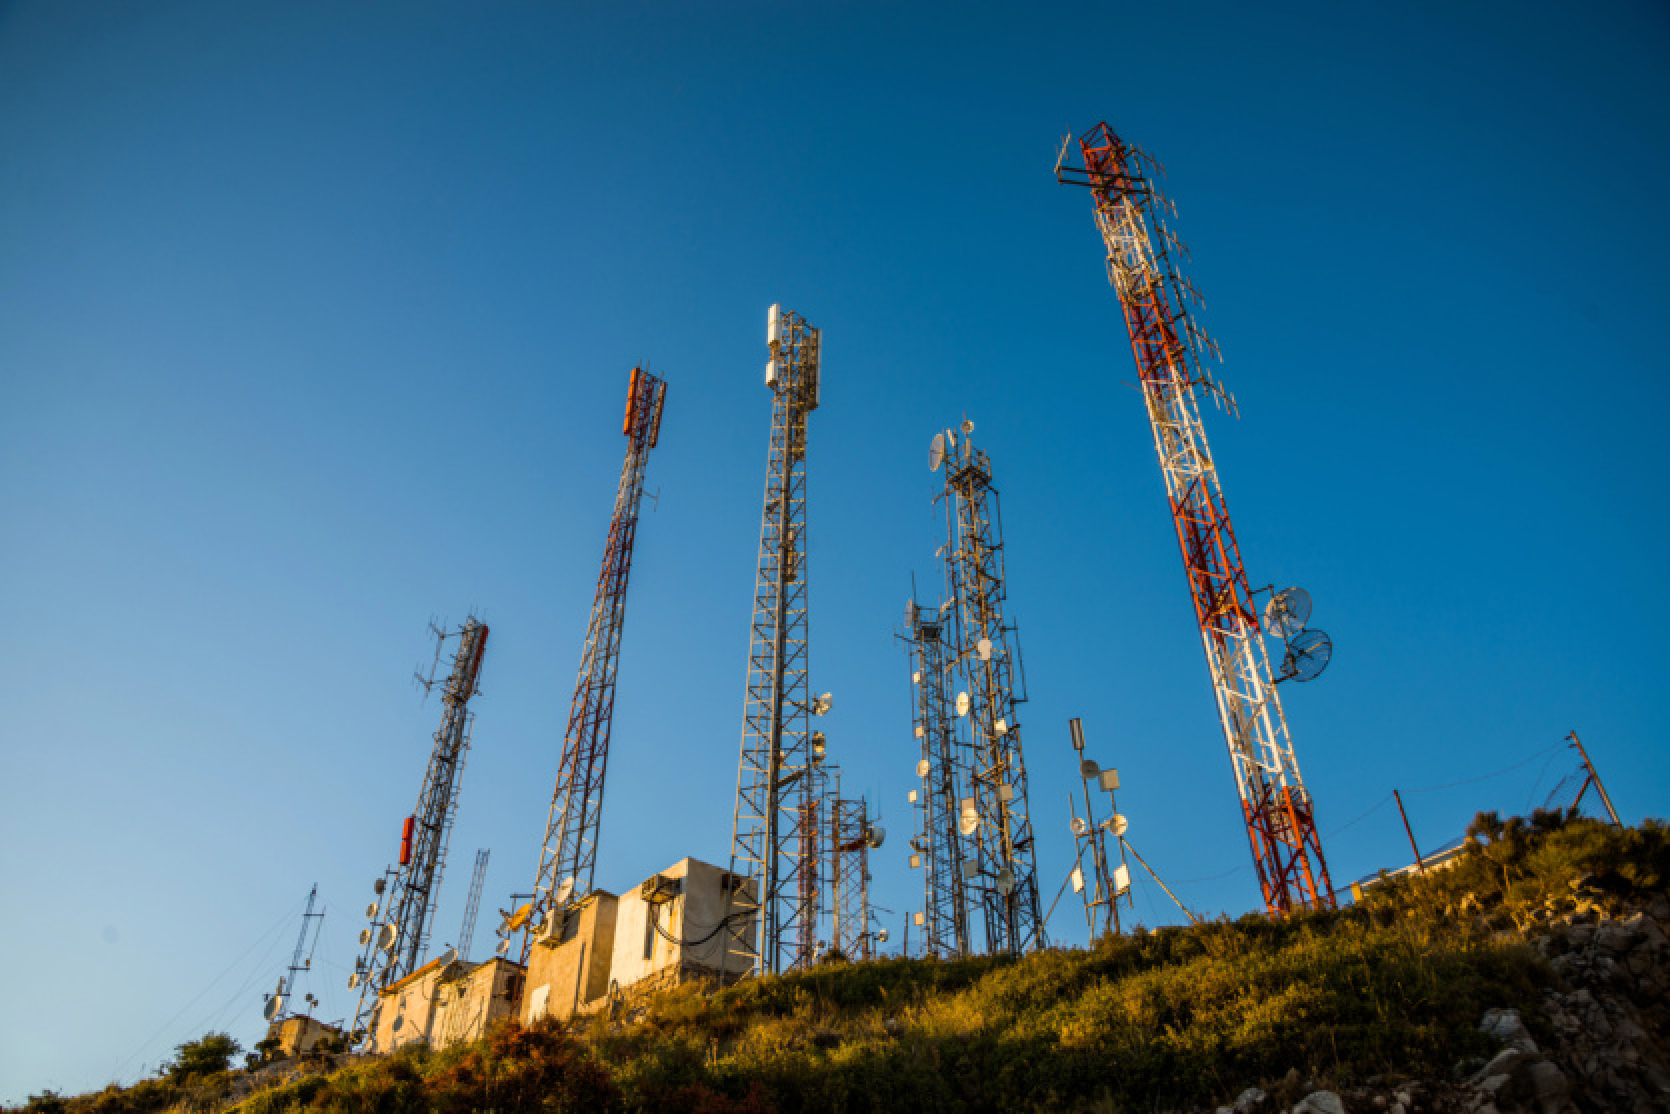 "Kyivstar, Vodafone and lifecell want to buy new licenses for 4G in the 2.3 GHz band